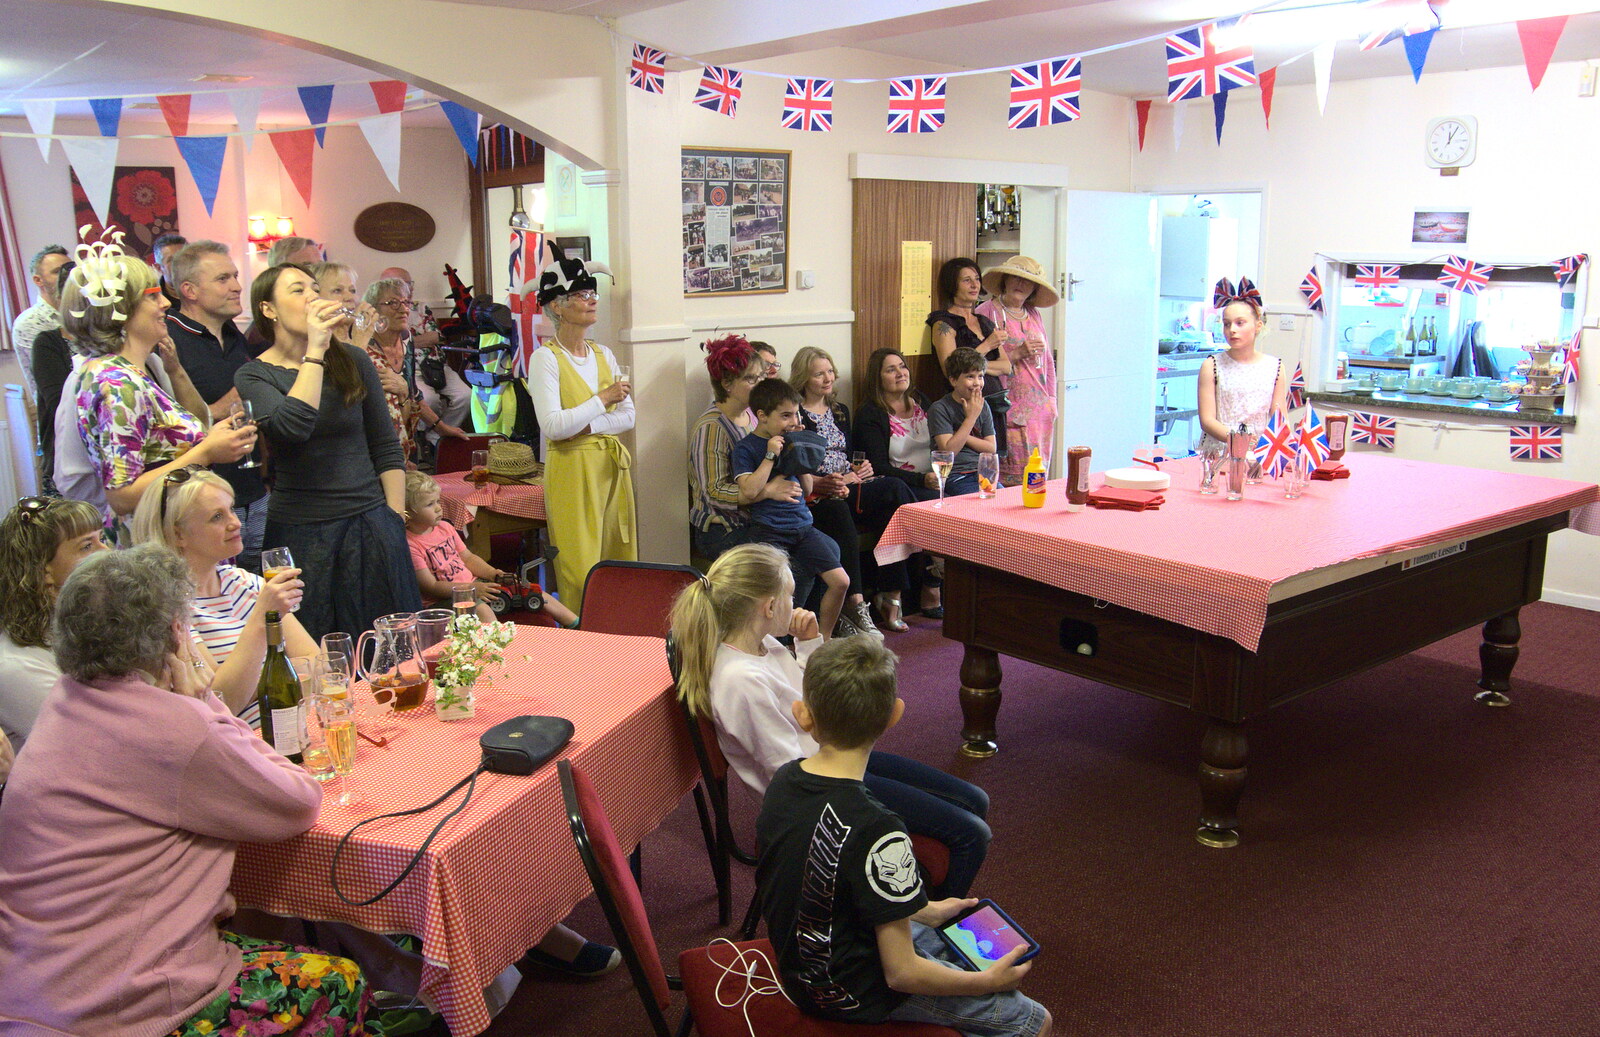 The crowds watch TV from A Right Royal Wedding at the Village Hall, Brome, Suffolk - 19th May 2018